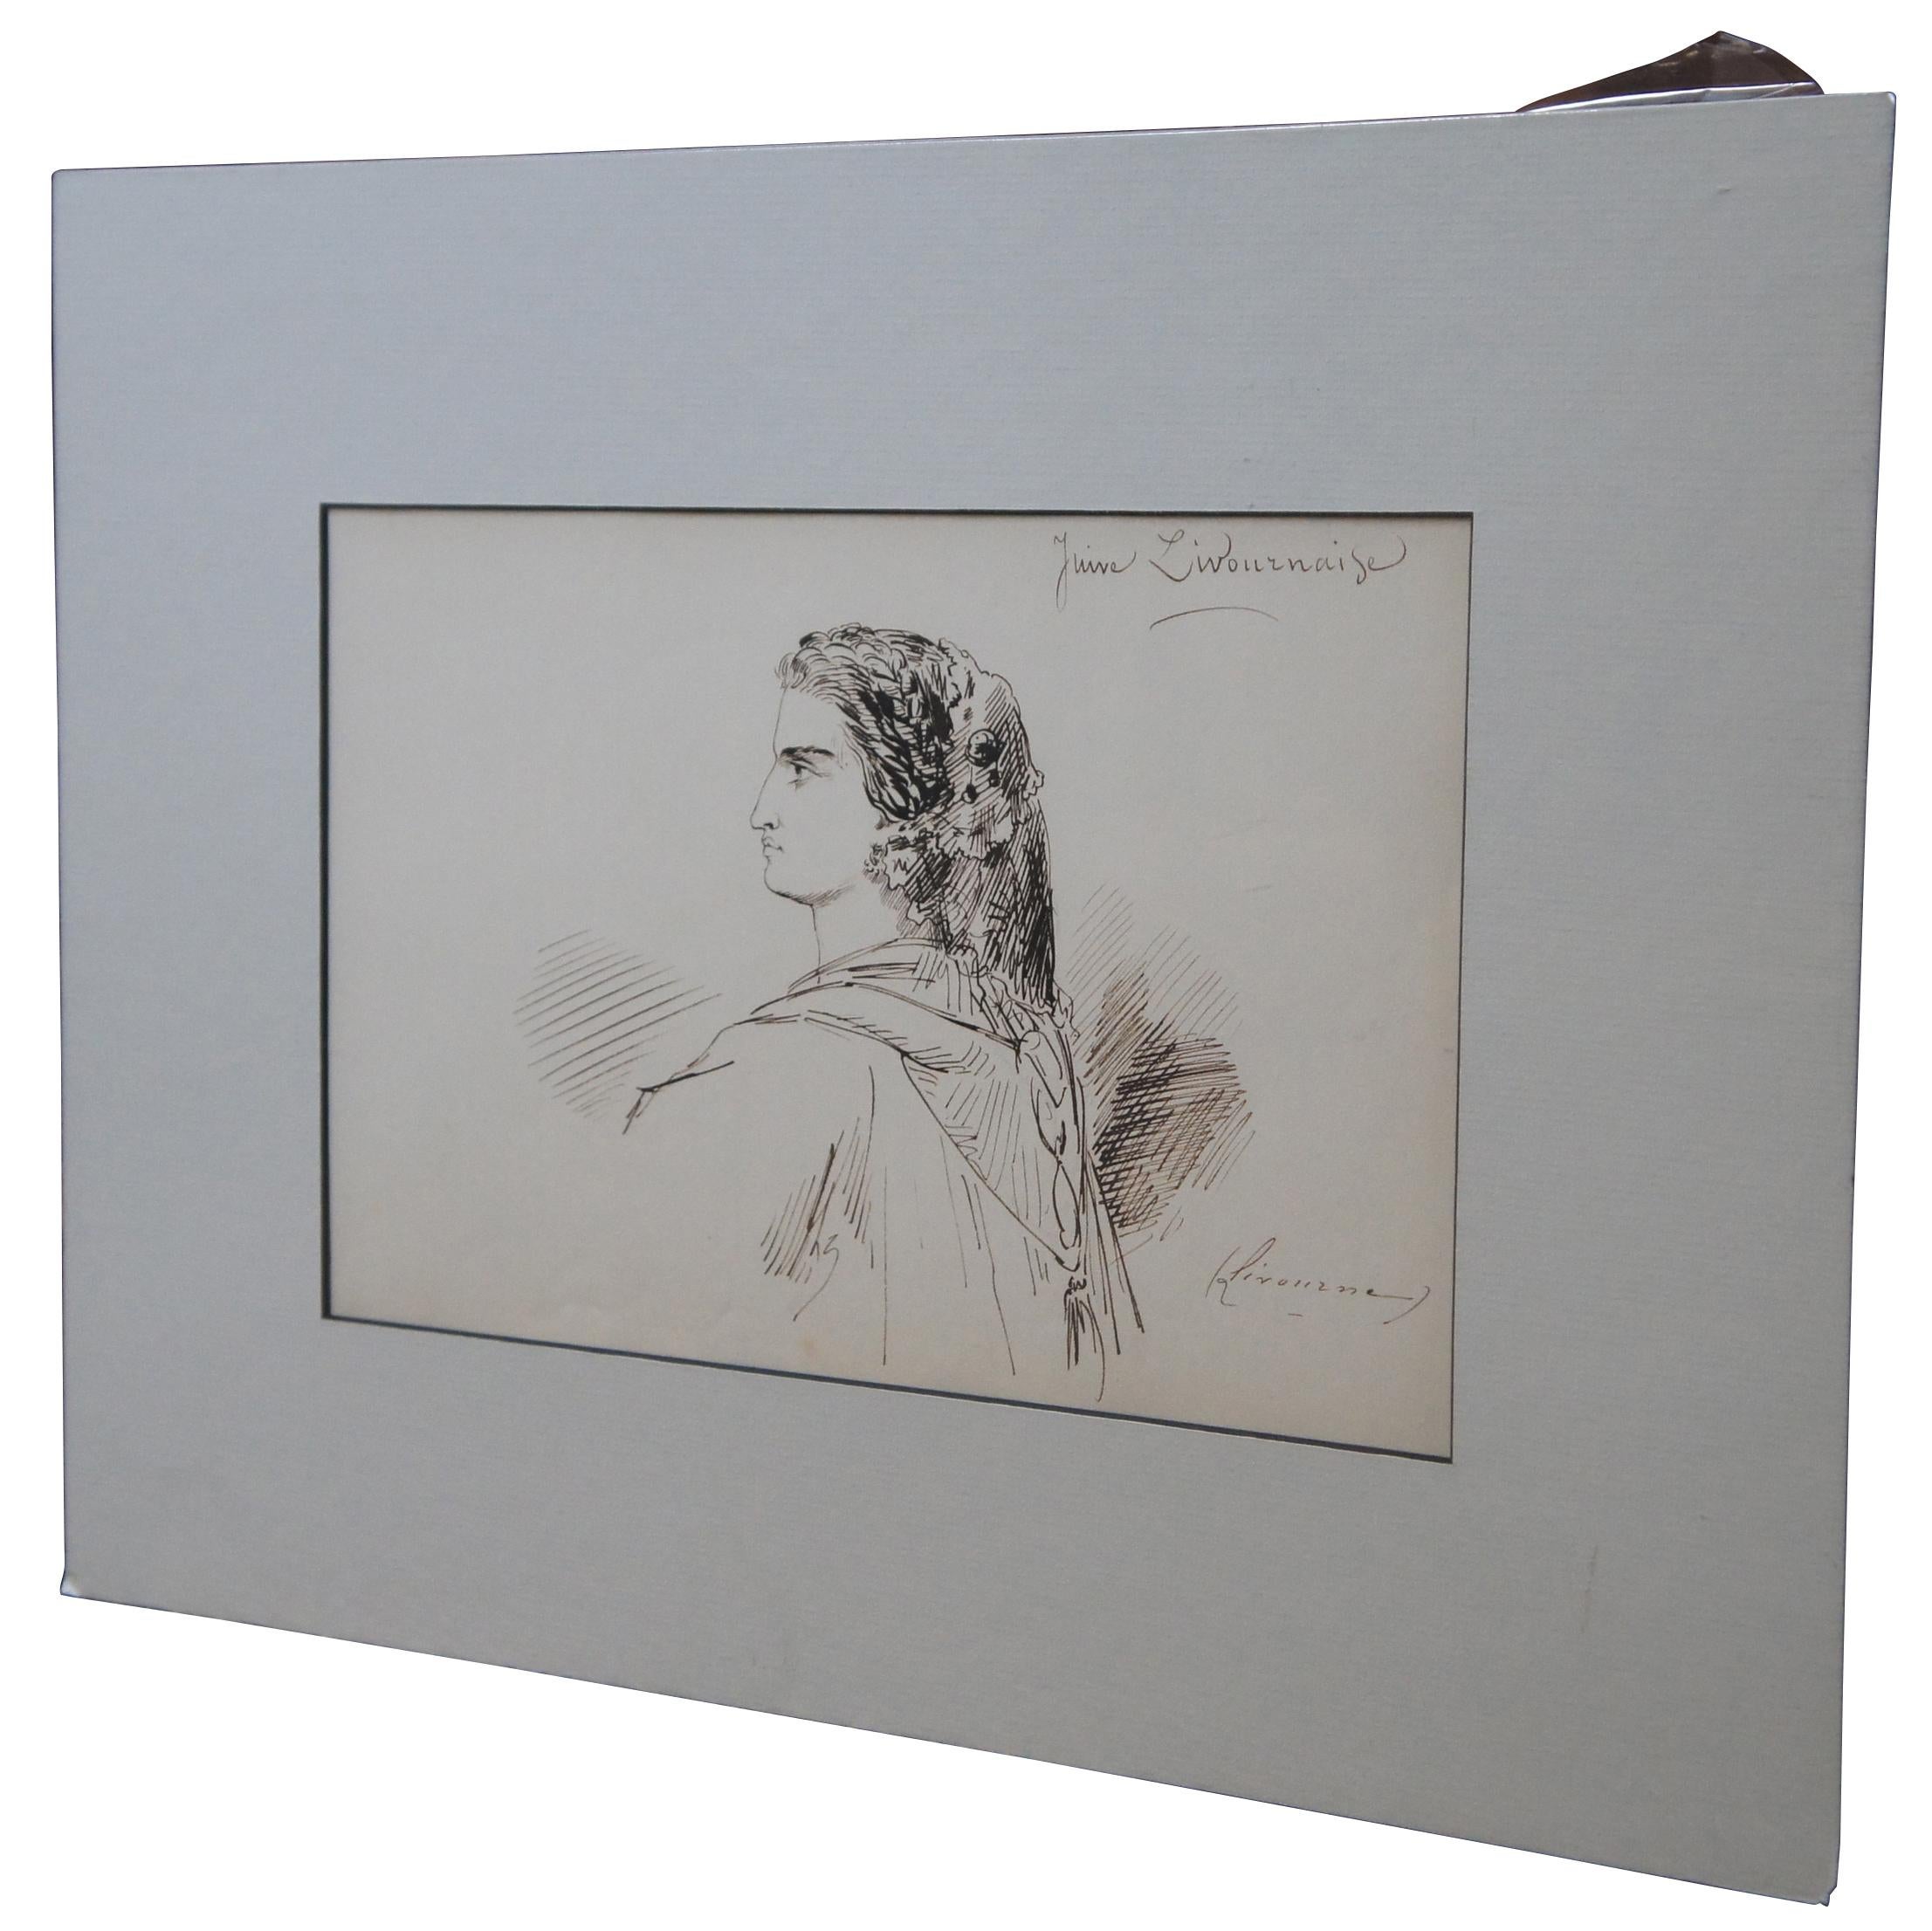 Antique 19th century ink drawing by Emile Dupont (French painter, 1822-1885) featuring a profile of a woman with strong aquiline nose, wearing a lacy veil on her hair and a shawl around her shoulders.

Measures: Sans mat - 11.5” x 7.5”.